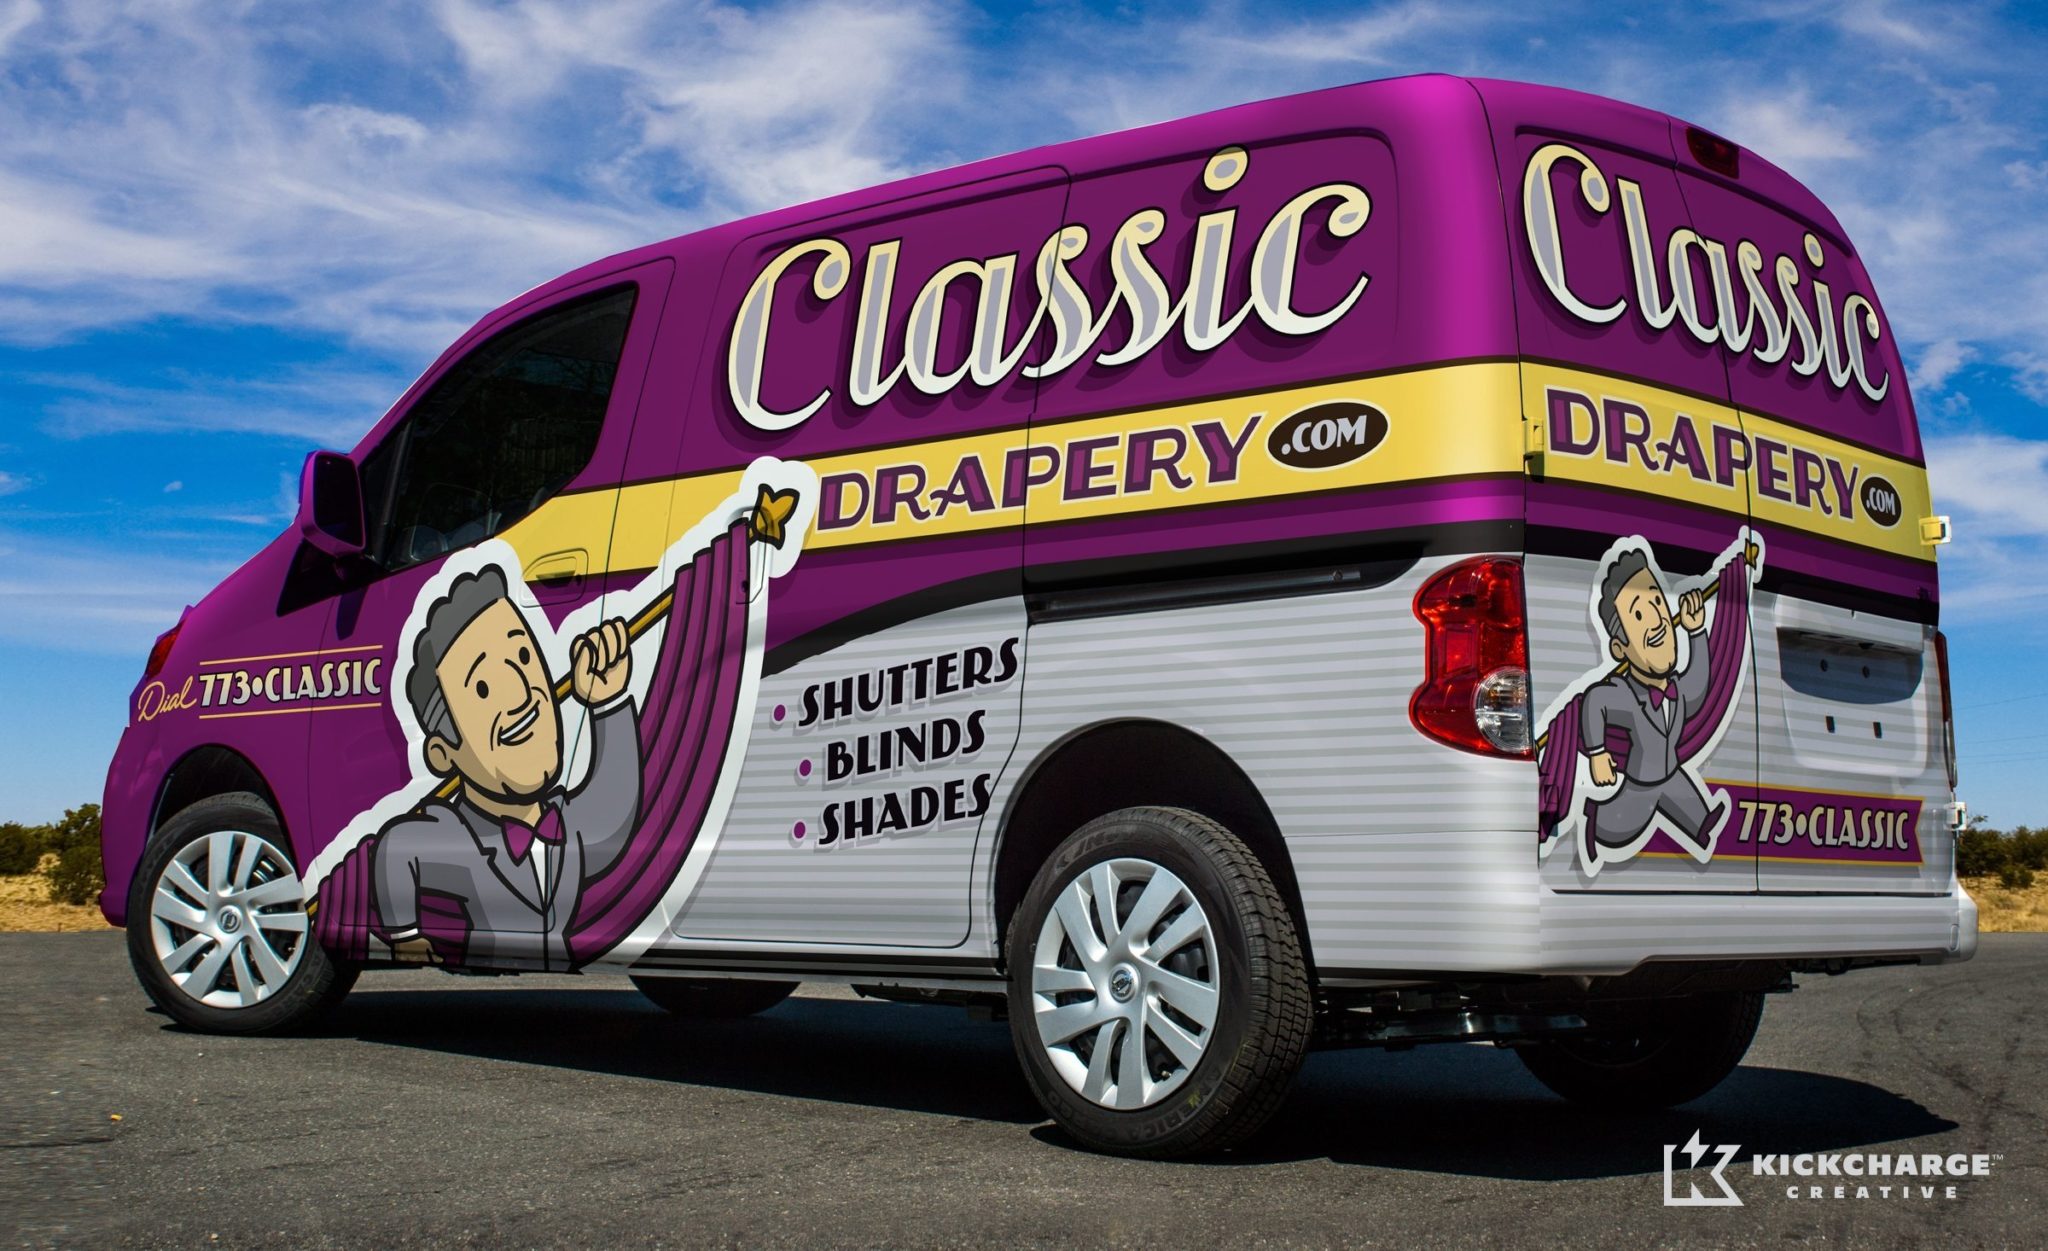 One of our best truck wraps utilizing a new retro brand, custom, hand-drawn artwork and type for this Chicago based drapery company.